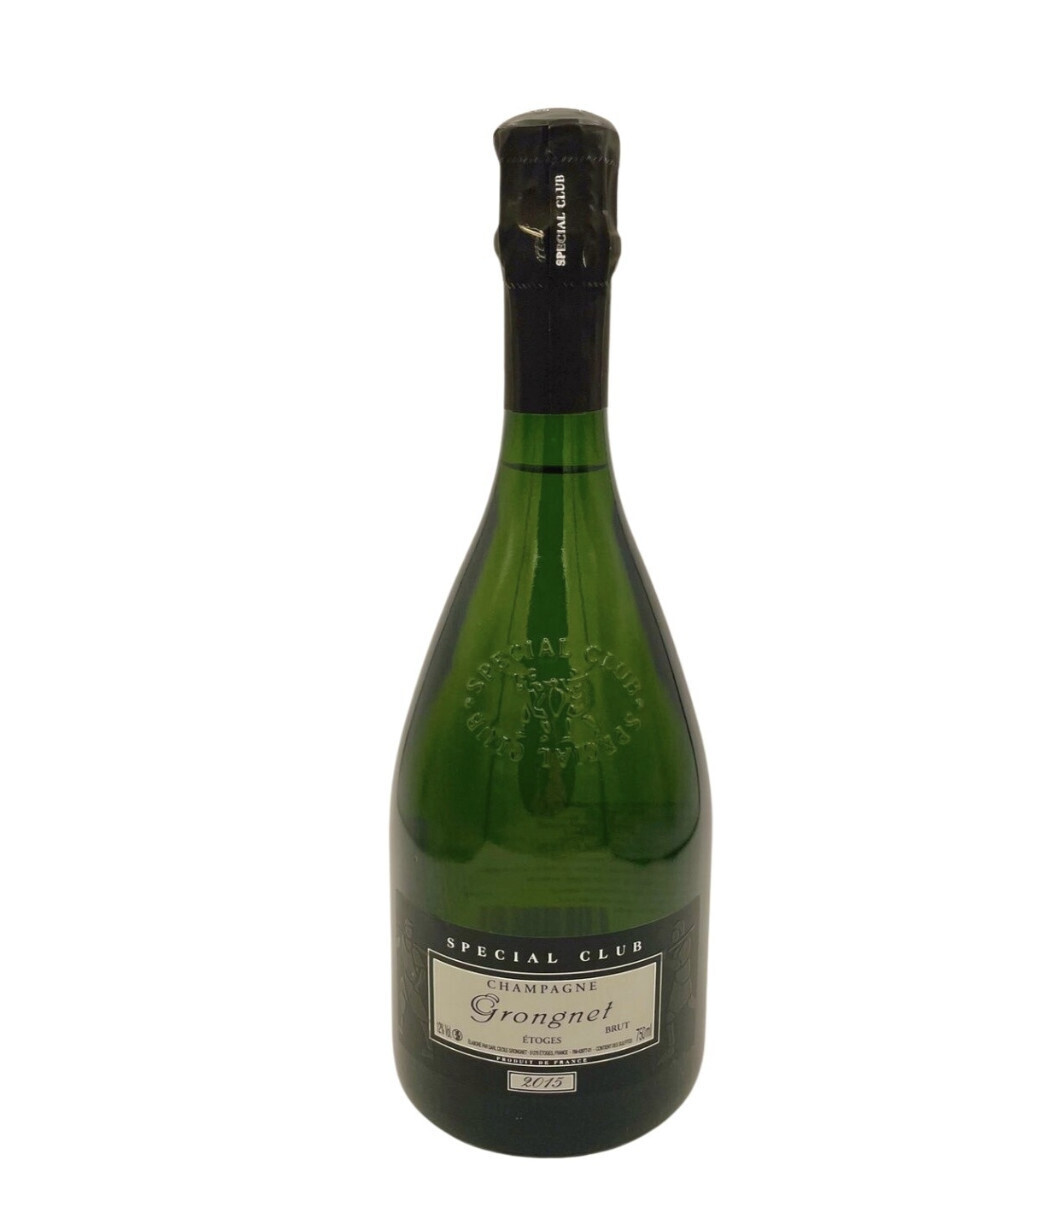 Grongnet Special Club Brut Champagne 2015